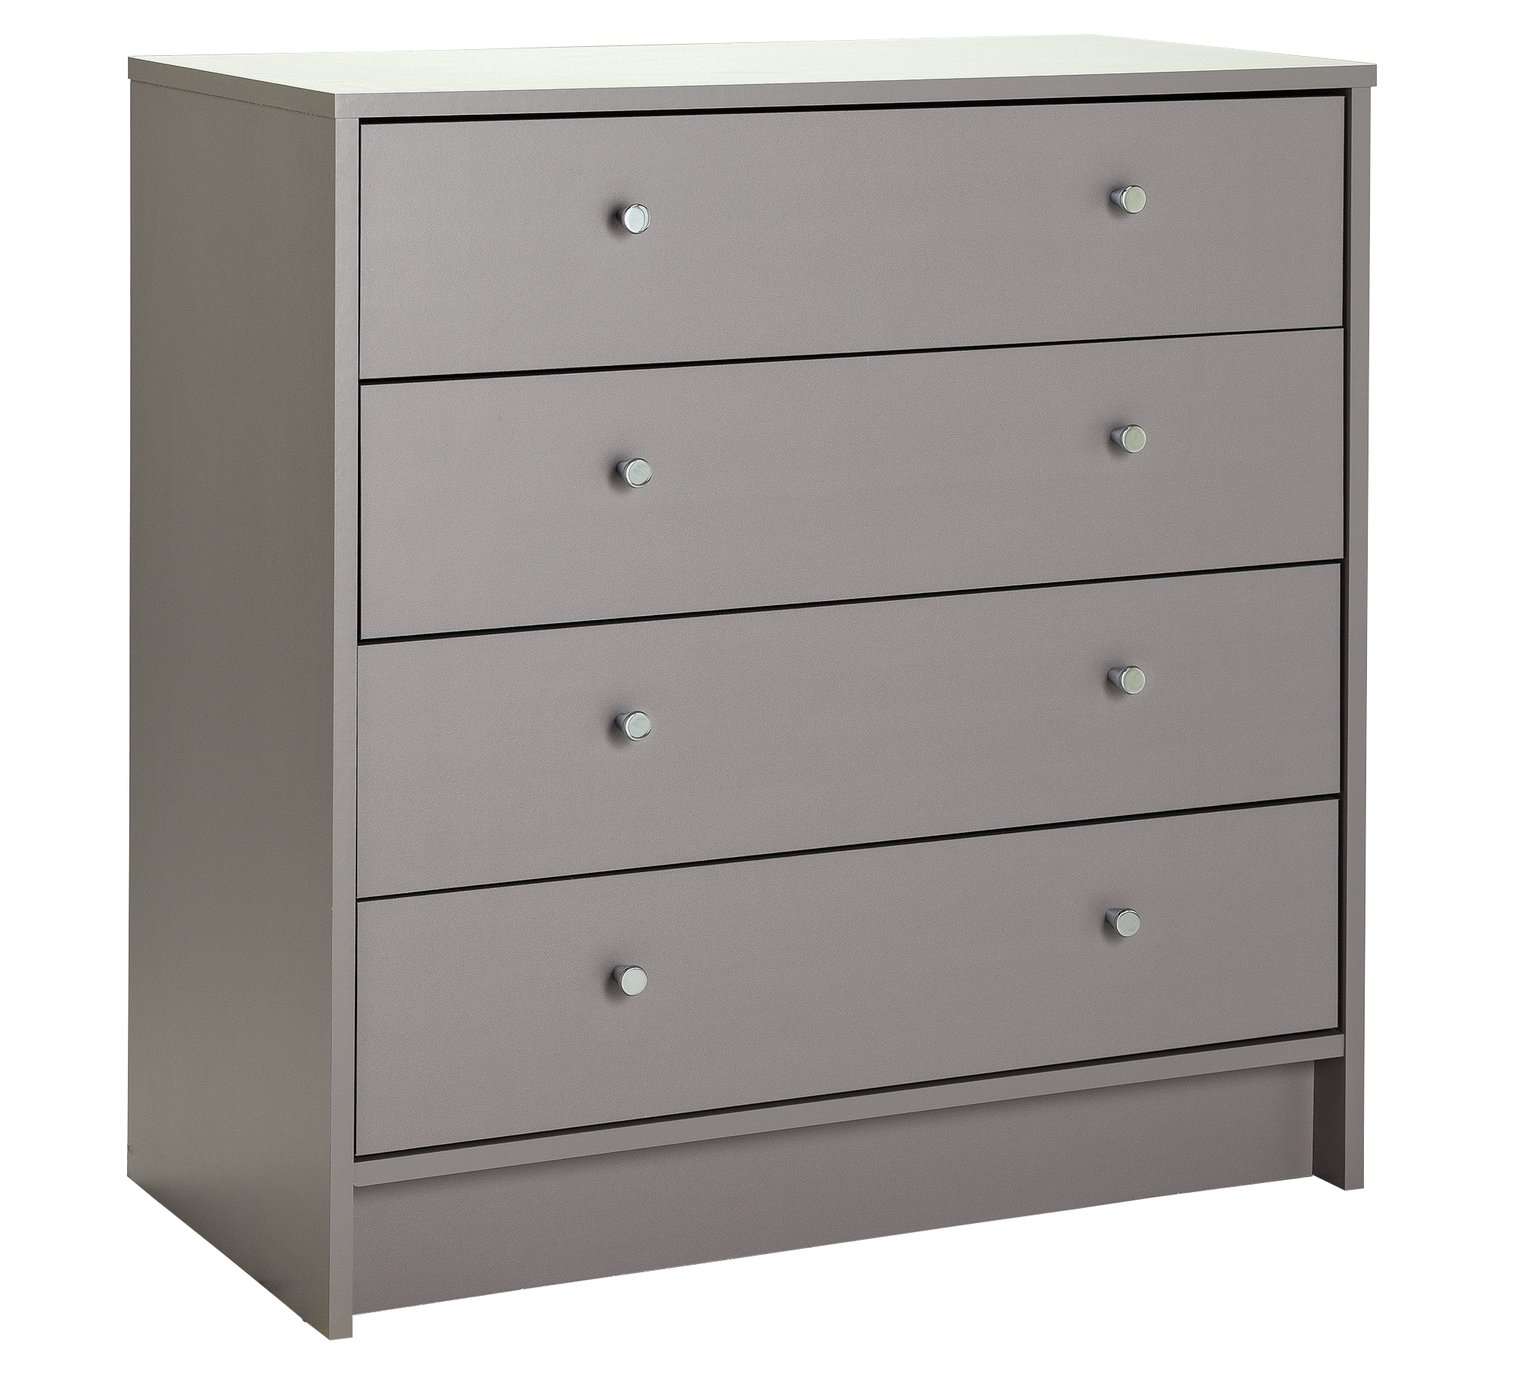 Argos Home Malibu 4 Drawer Wide Chest review